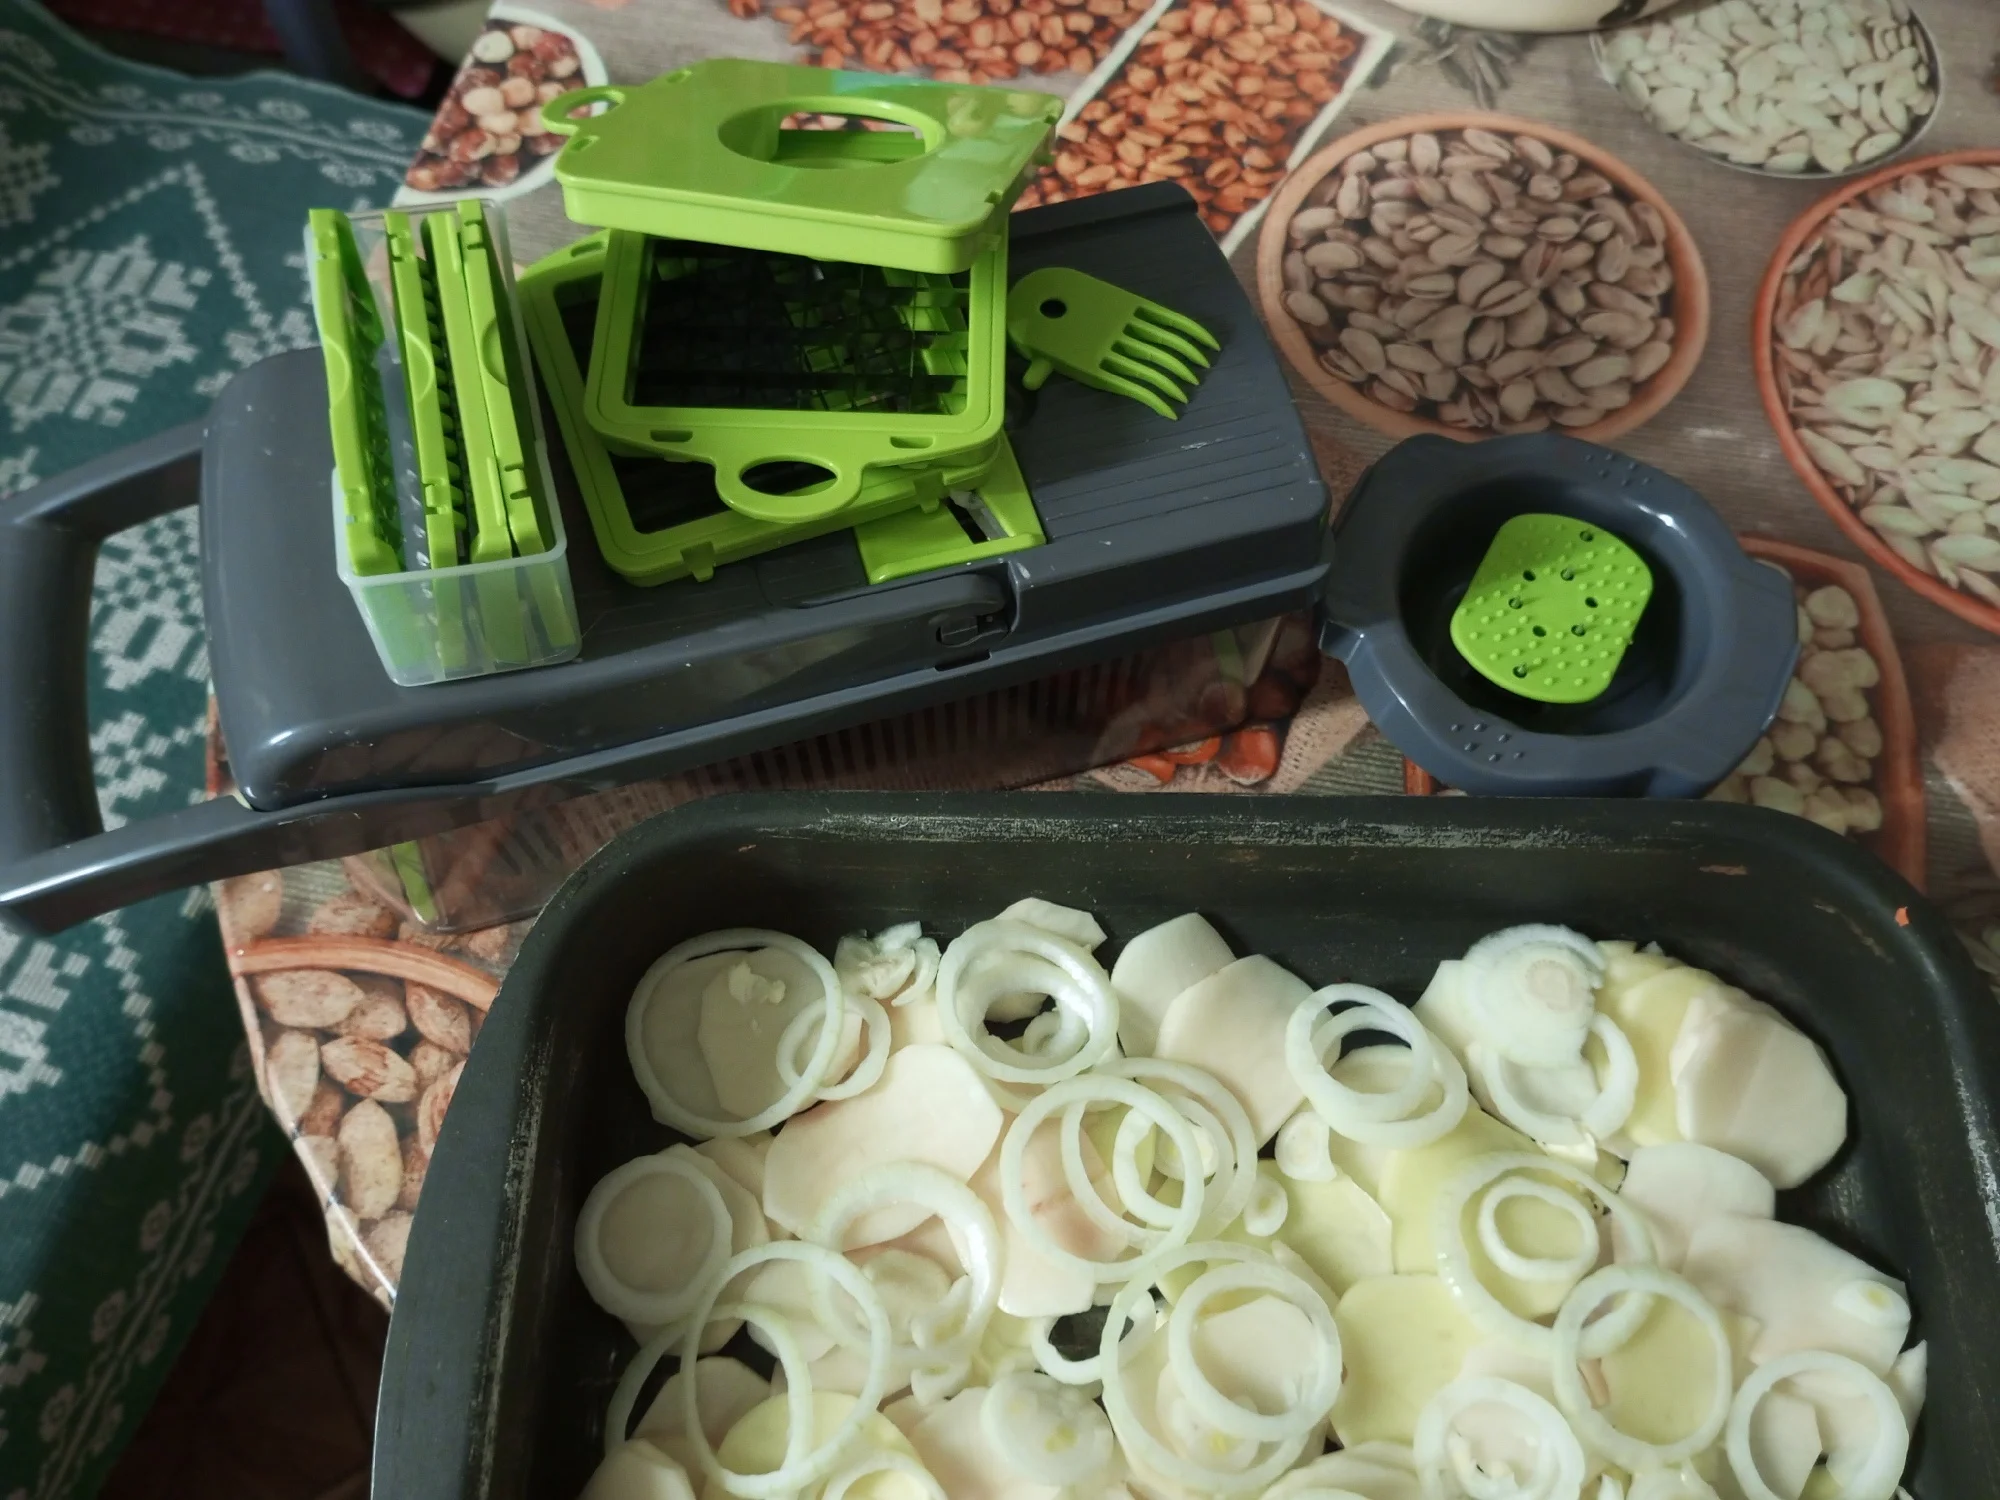 8-in-1 Multifunctional Vegetable Cutter - Effortlessly Slice and Grate Vegetables with Versatile Kitchen Gadget photo review